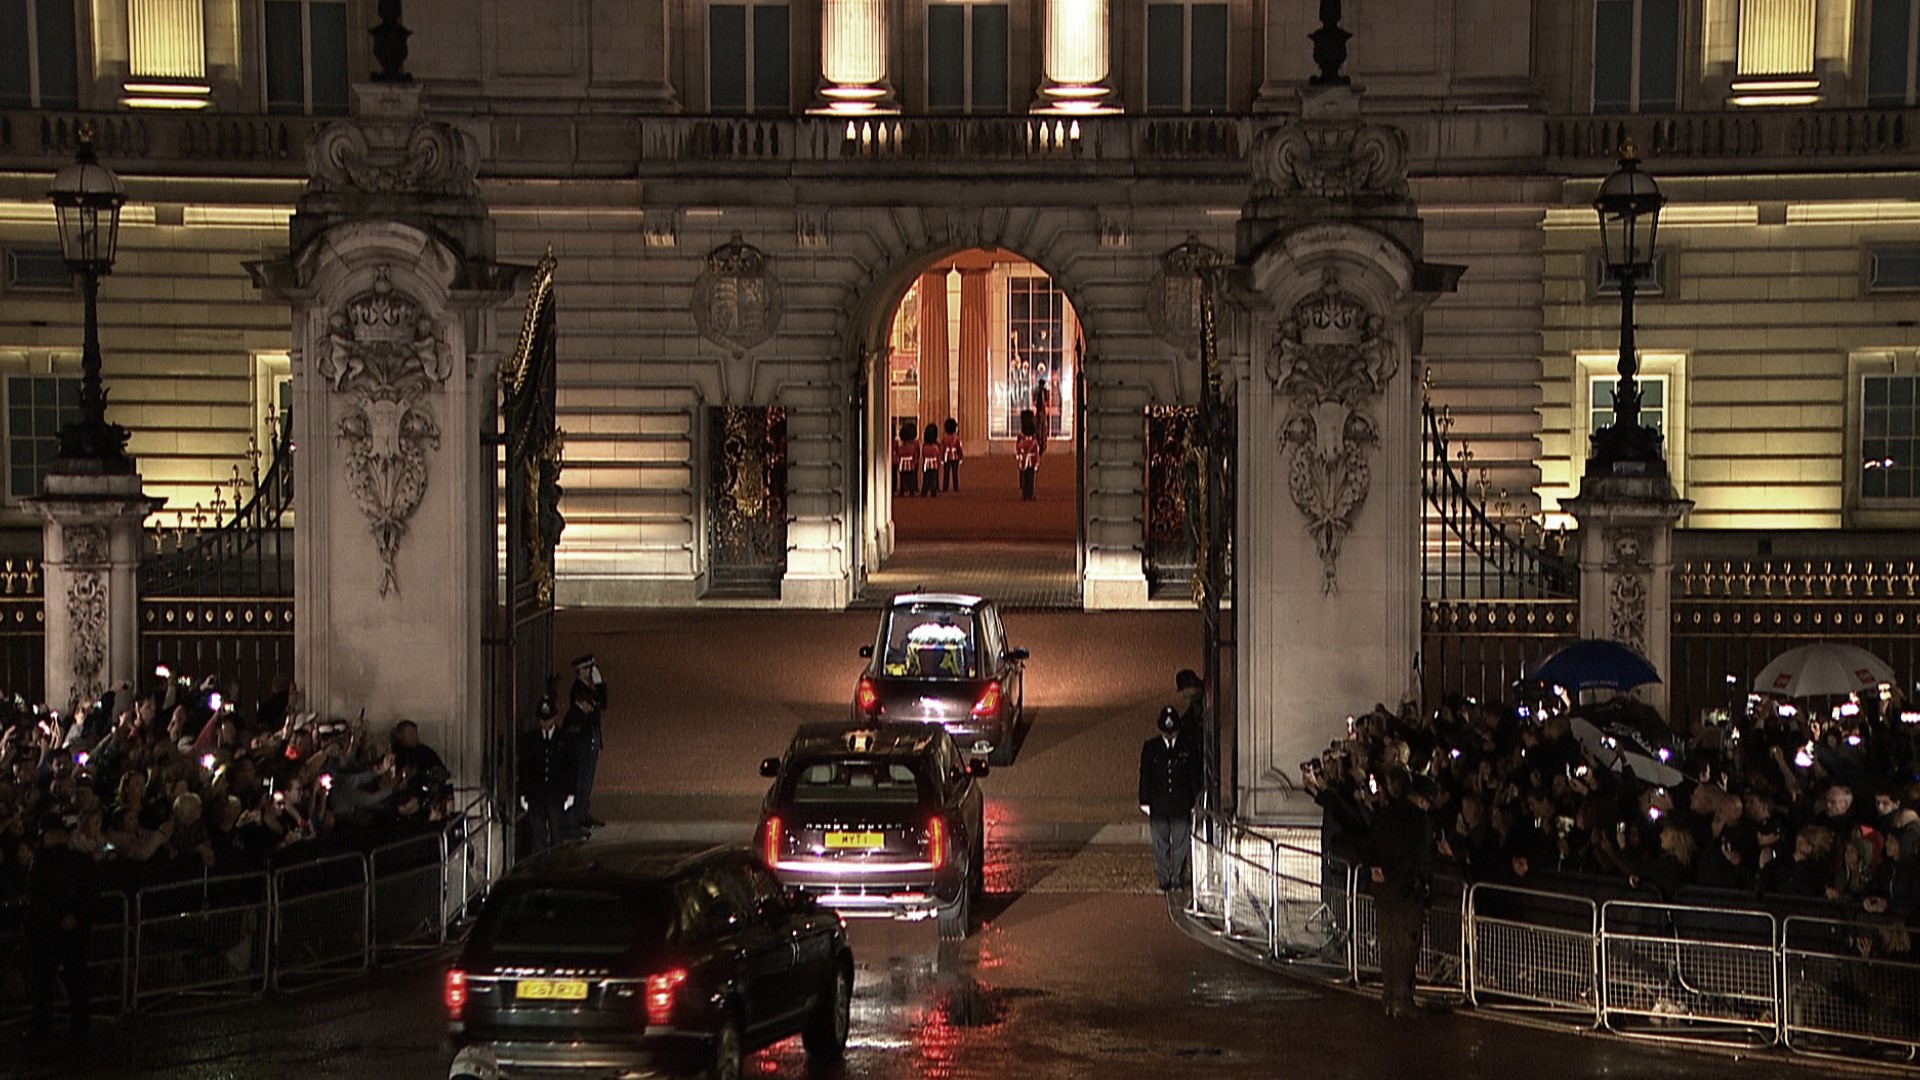 Members of the late monarch's family received the hearse as it arrived at Buckingham Palace